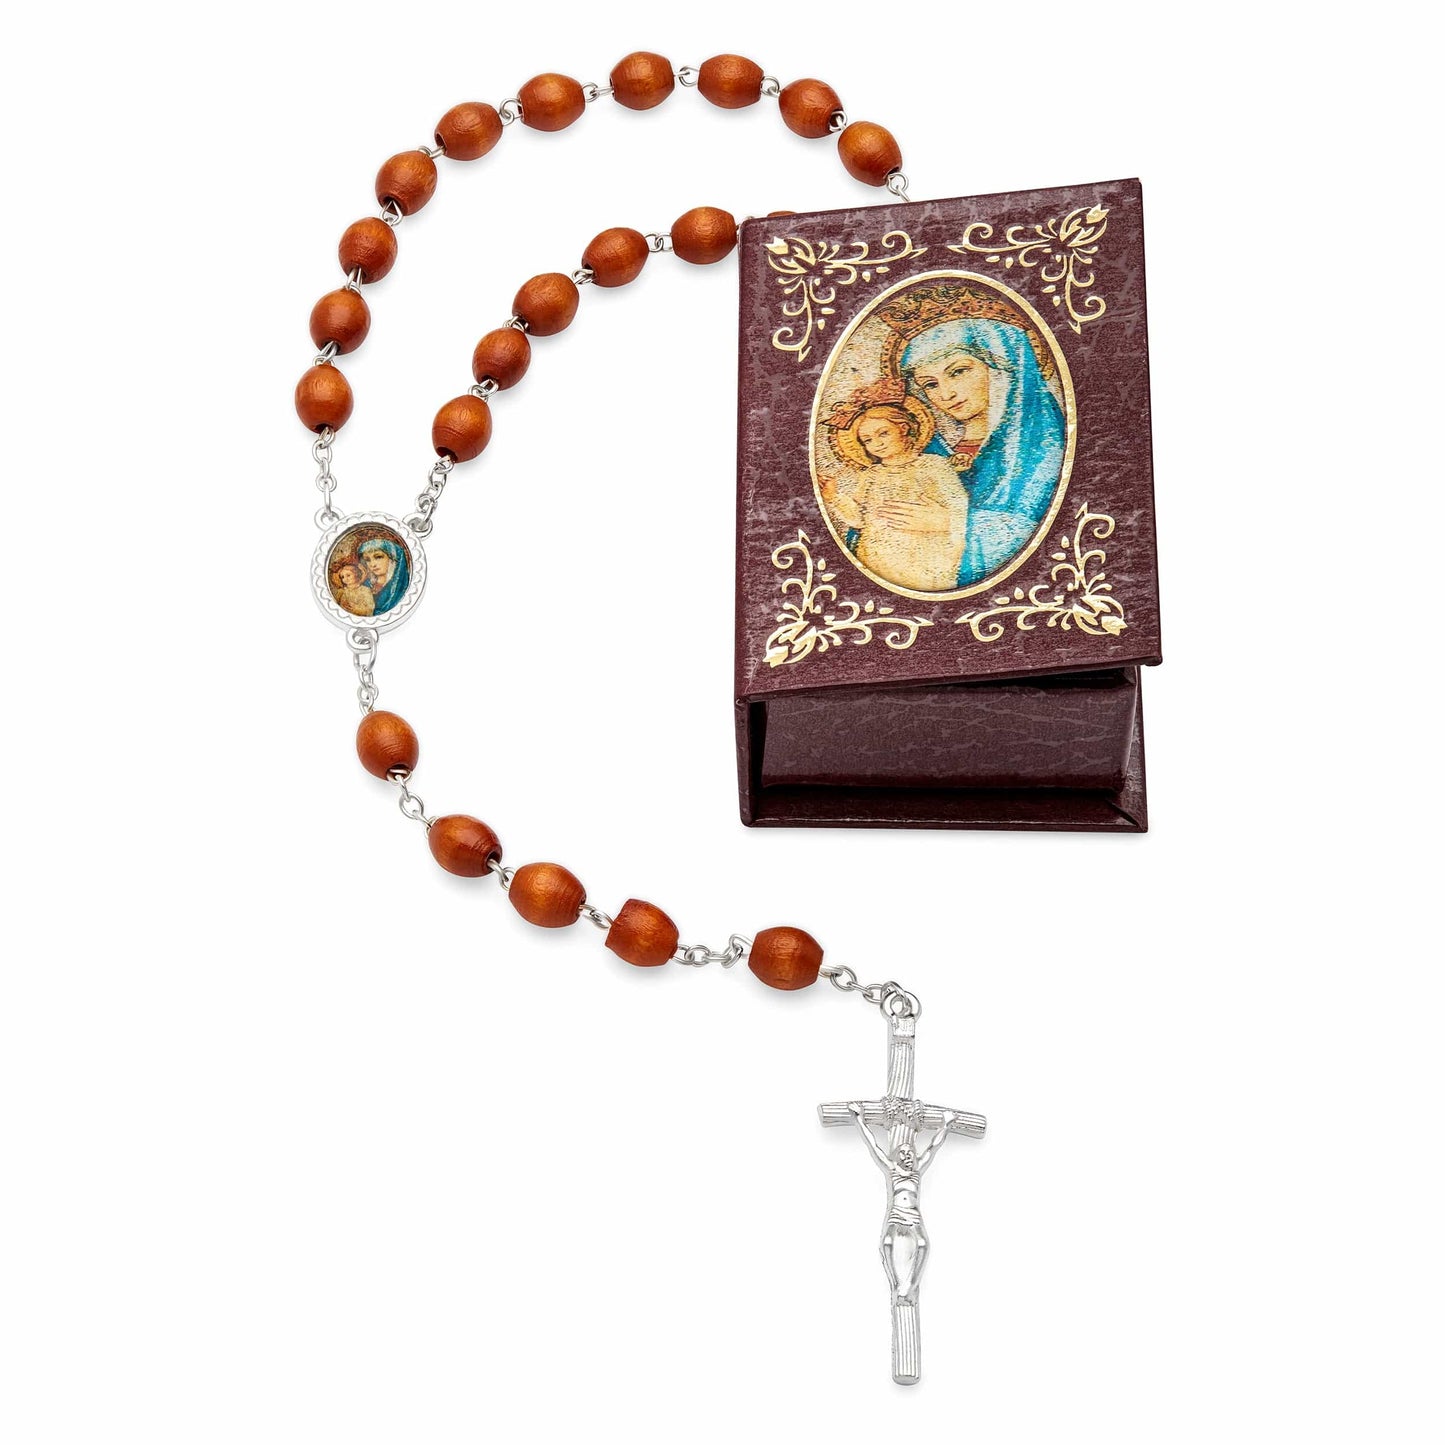 MONDO CATTOLICO Prayer Beads 53 cm (20.90 in) / 7 mm (0.30 in) Brown Box and Rosary with Mater Ecclesiae Virgin